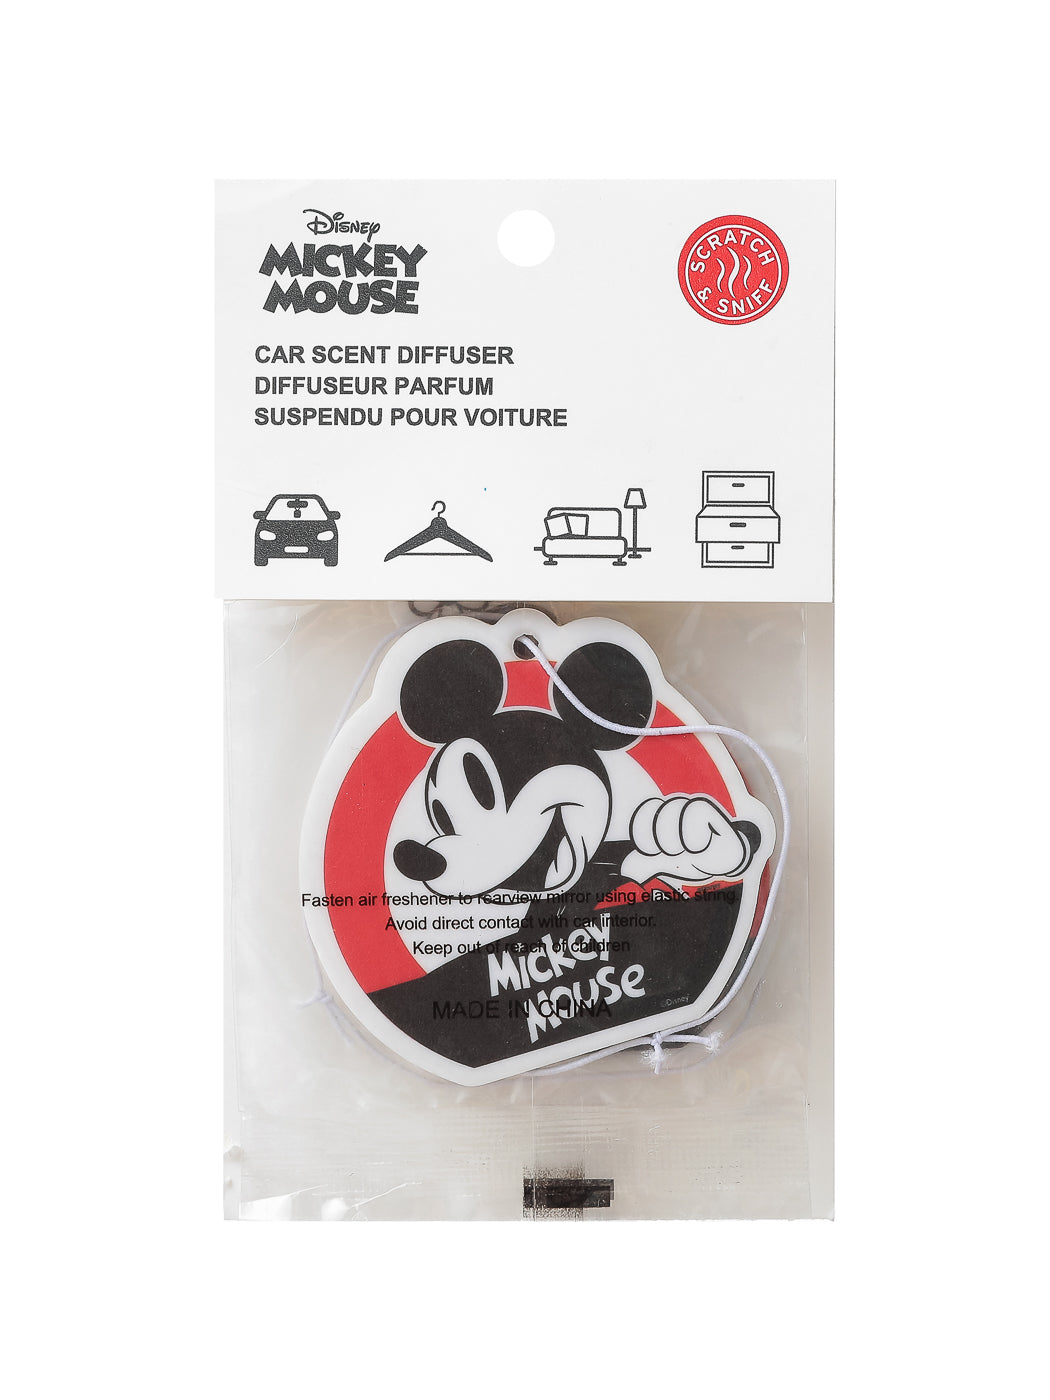 MINISO MICKEY MOUSE COLLECTION 2.0 HANGING CAR SCENT DIFFUSER-2PCS(SANDALWOOD) 2010516911101 SCENT DIFFUSER